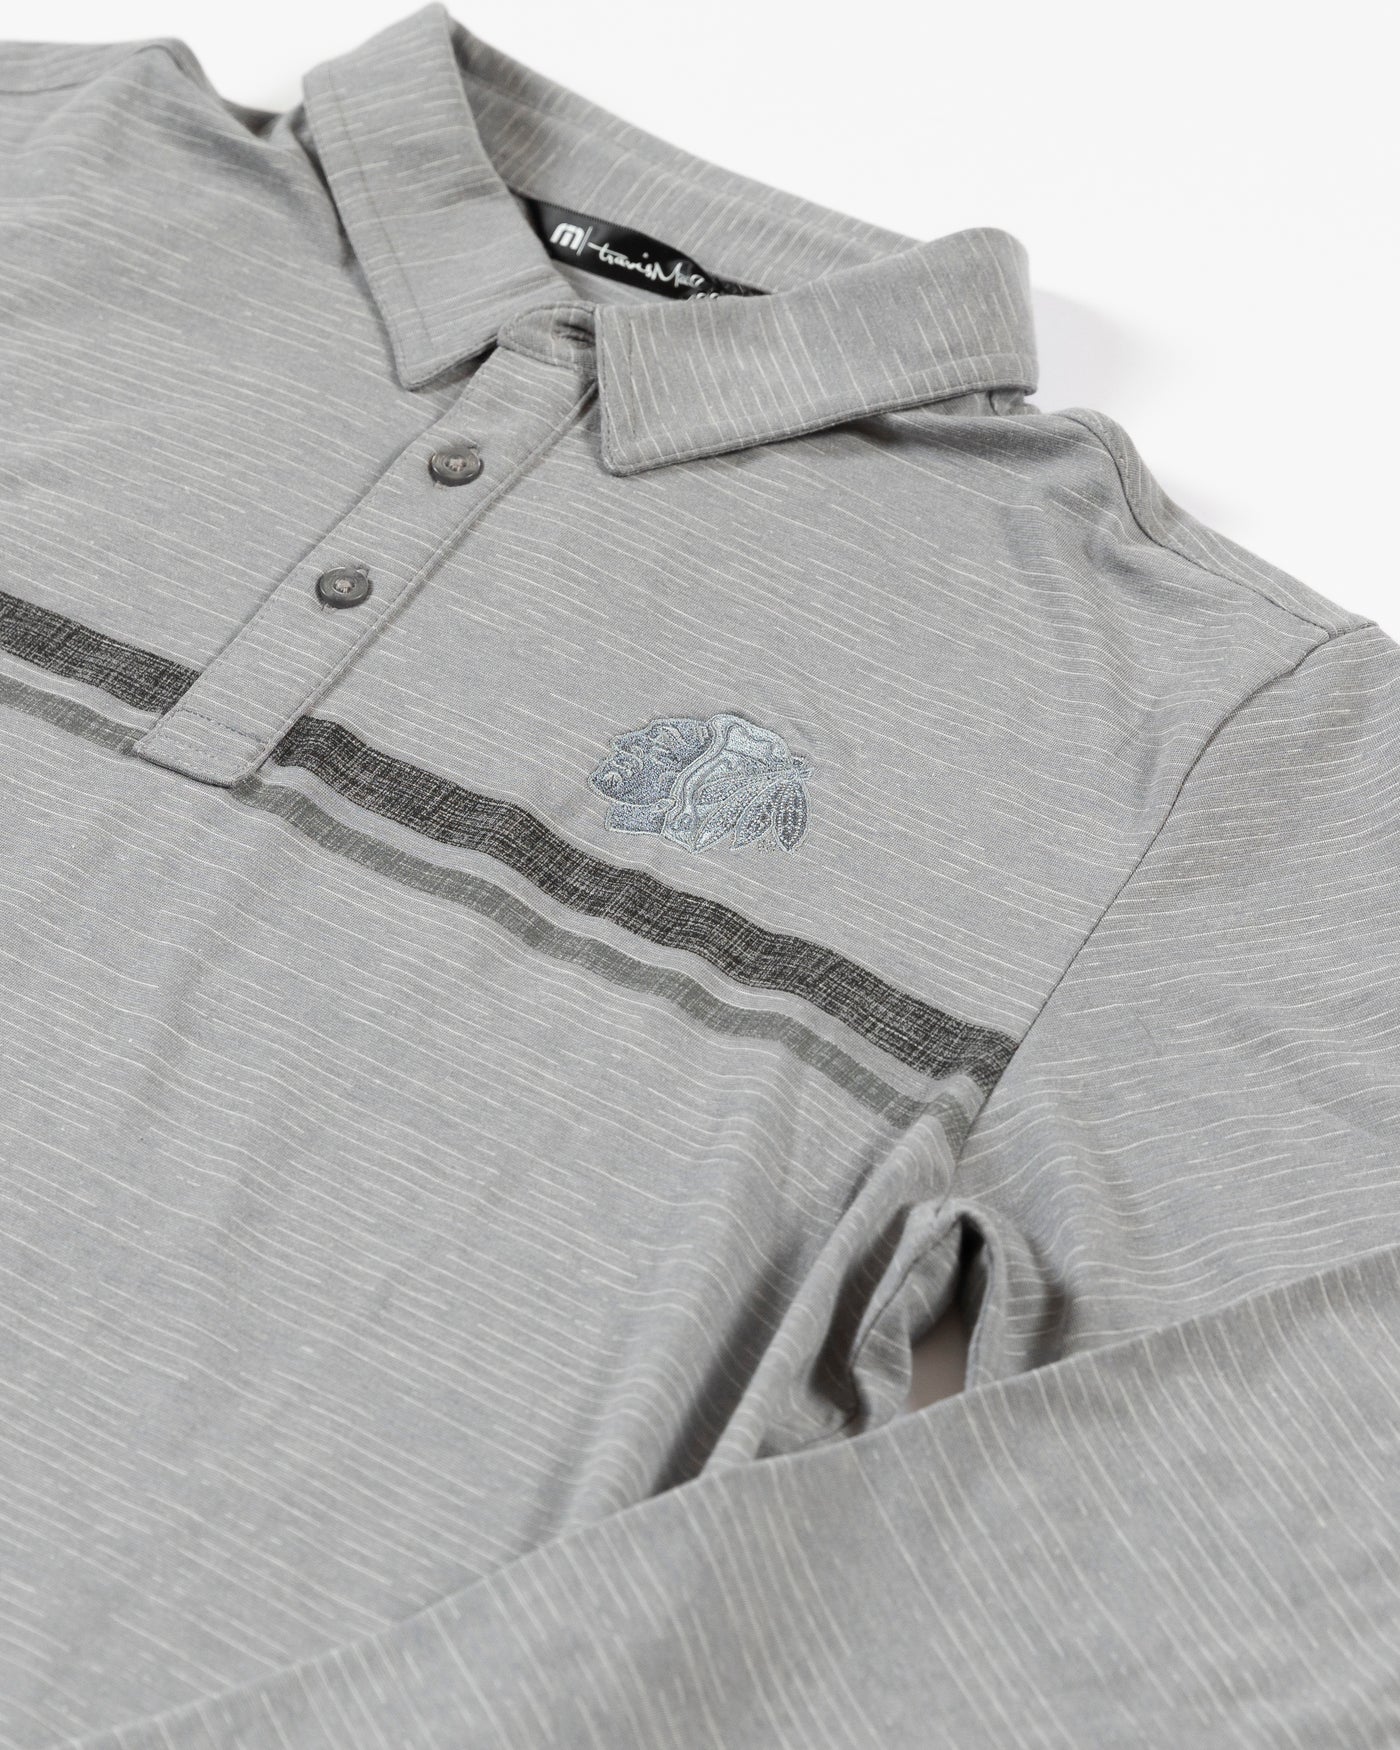 TravisMathew heather grey long sleeve polo with embroidered tonal primary logo on left chest - detail lay flat